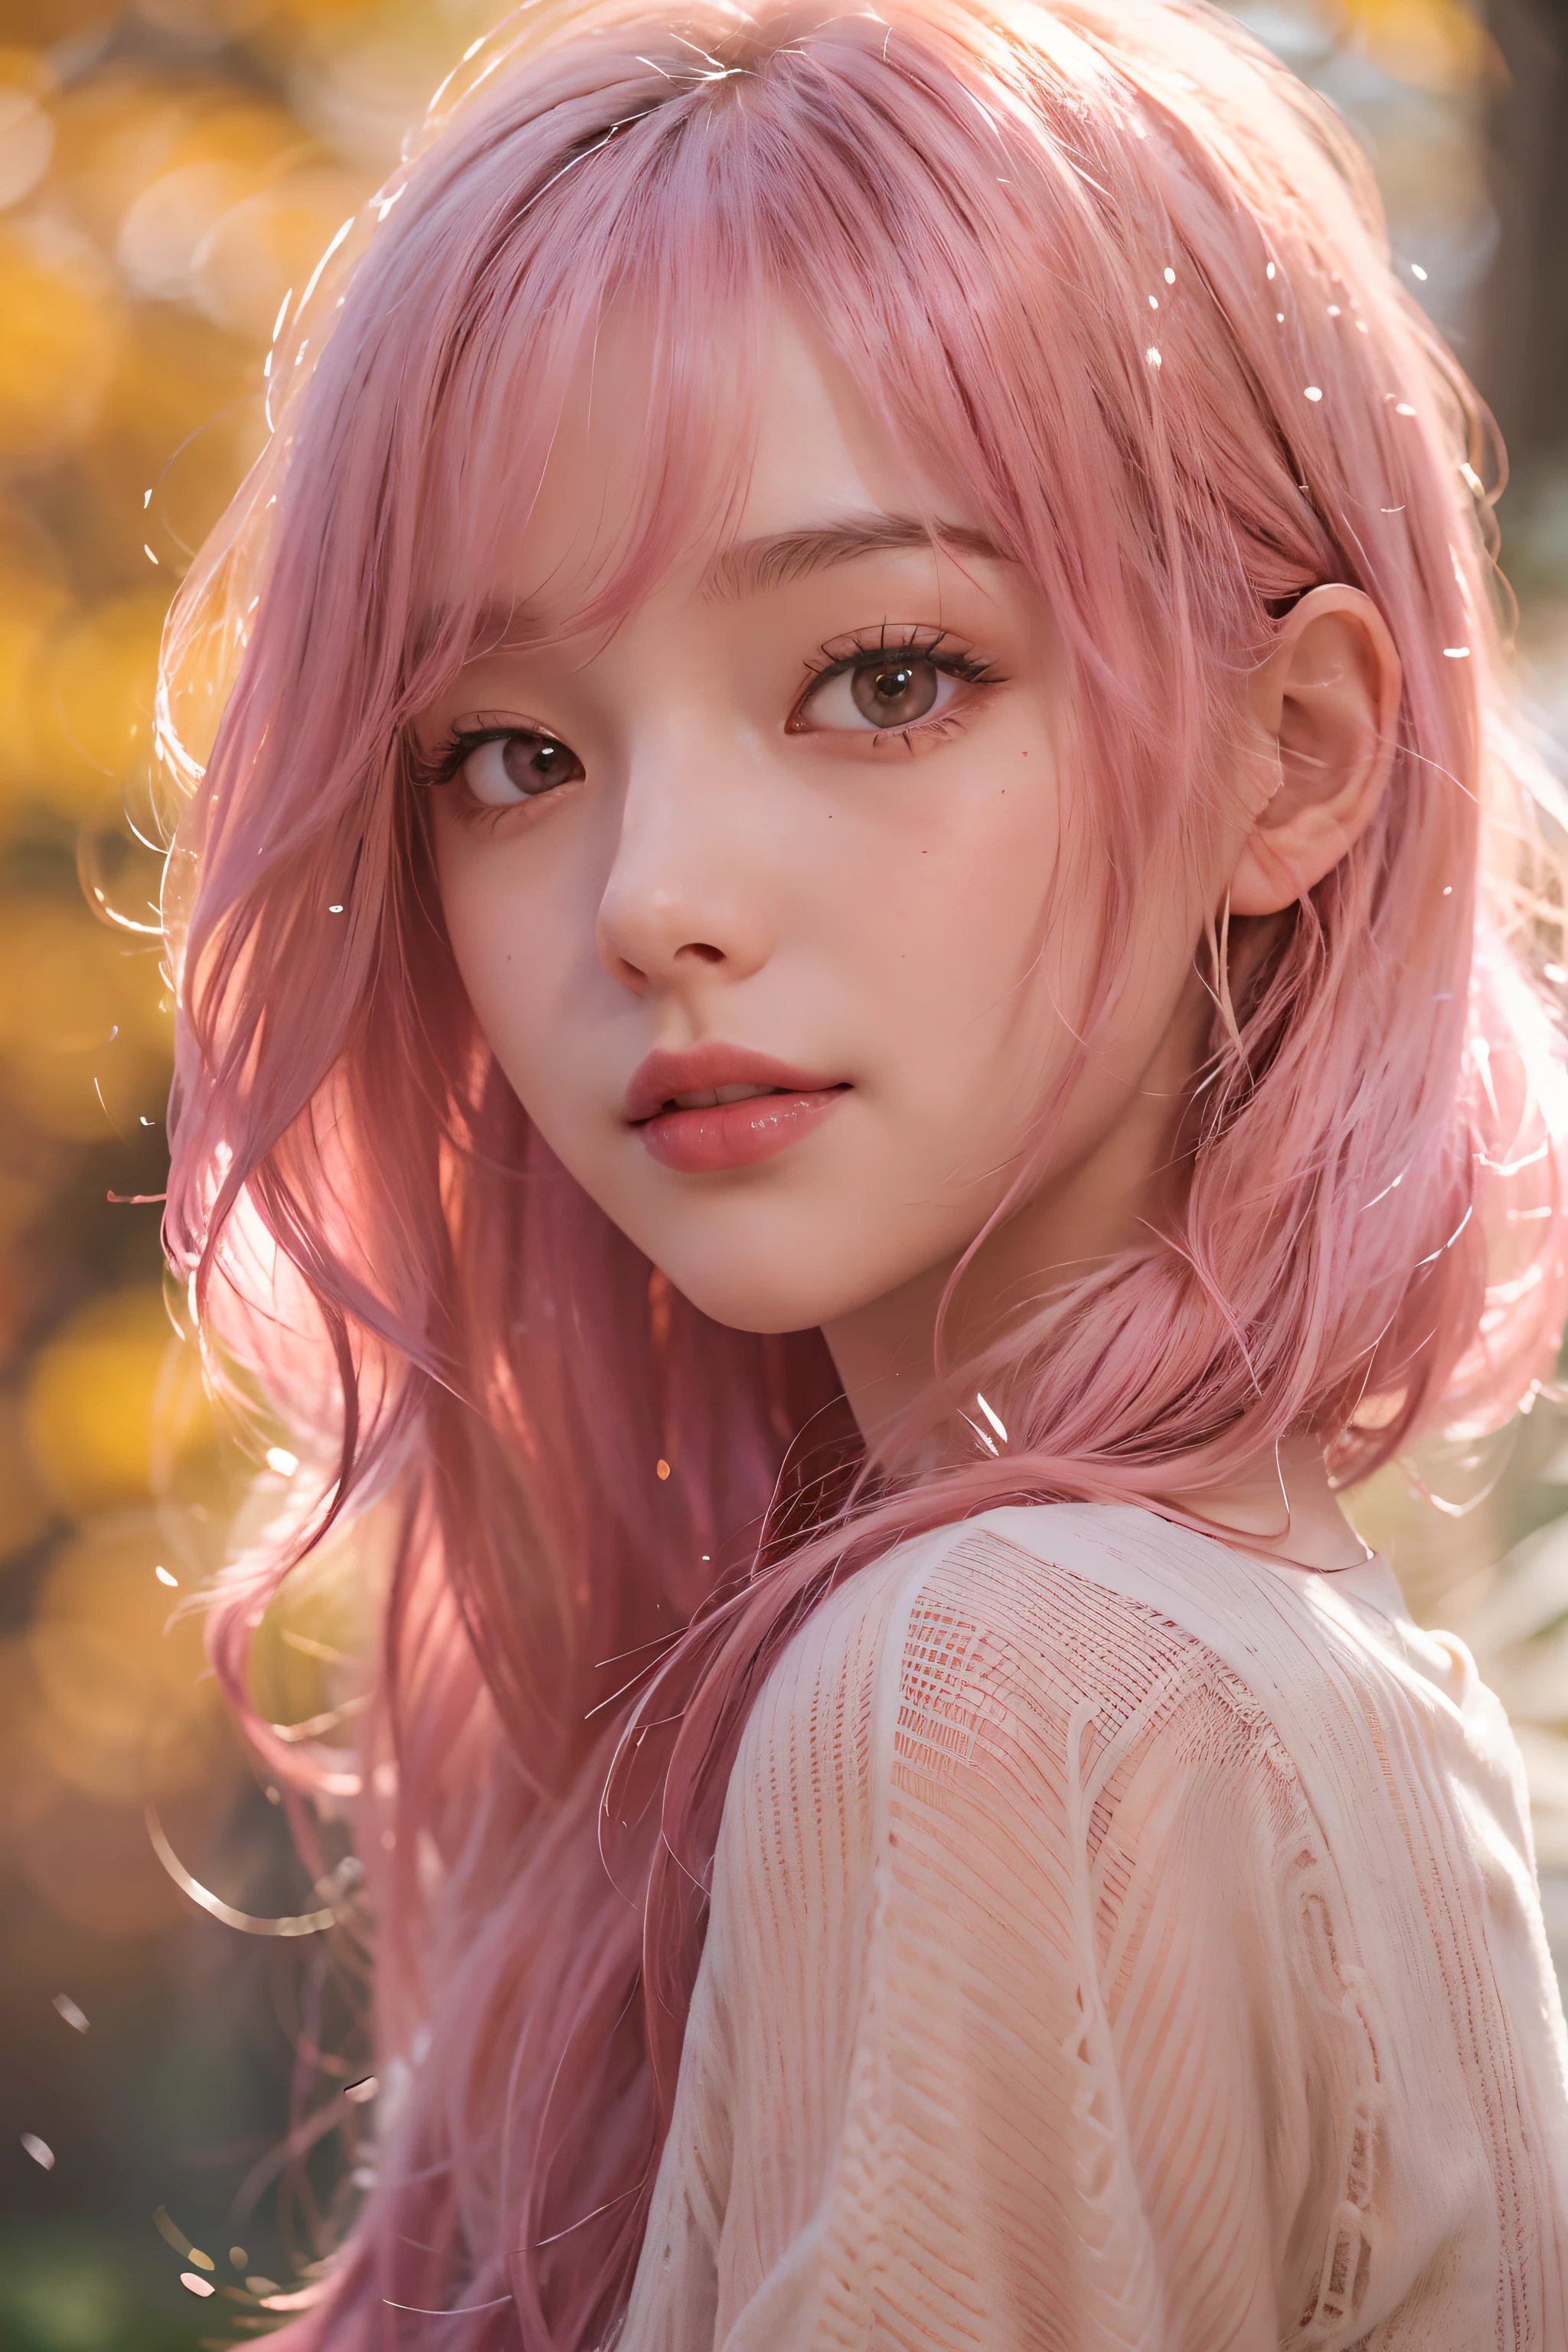 ((Extra Upper Shot))、(looking at view)、1girl in、in her 20s、(Pink hair)、((Medium hair))、(bangss)、(The best smile)、(Photoreal Stick:1.2)、in 8K、high-level image quality、(High quality shadows)、Detail Beautiful delicate face、Detail Beautiful delicate eyes、pureerosface_v1、gloweyes、(Red lipstick close to orange)、perfectbody、Perfect Style、(Brown eyes)、 (strong lights)、Shiny hair、Description beautiful delicate hair、(Lustrous skin)、(White sweater)、 (early evening)、A walk in the forest of autumn leaves、Scattering leaves、Waterfall in the distance、Background blur、light、Sunlight、